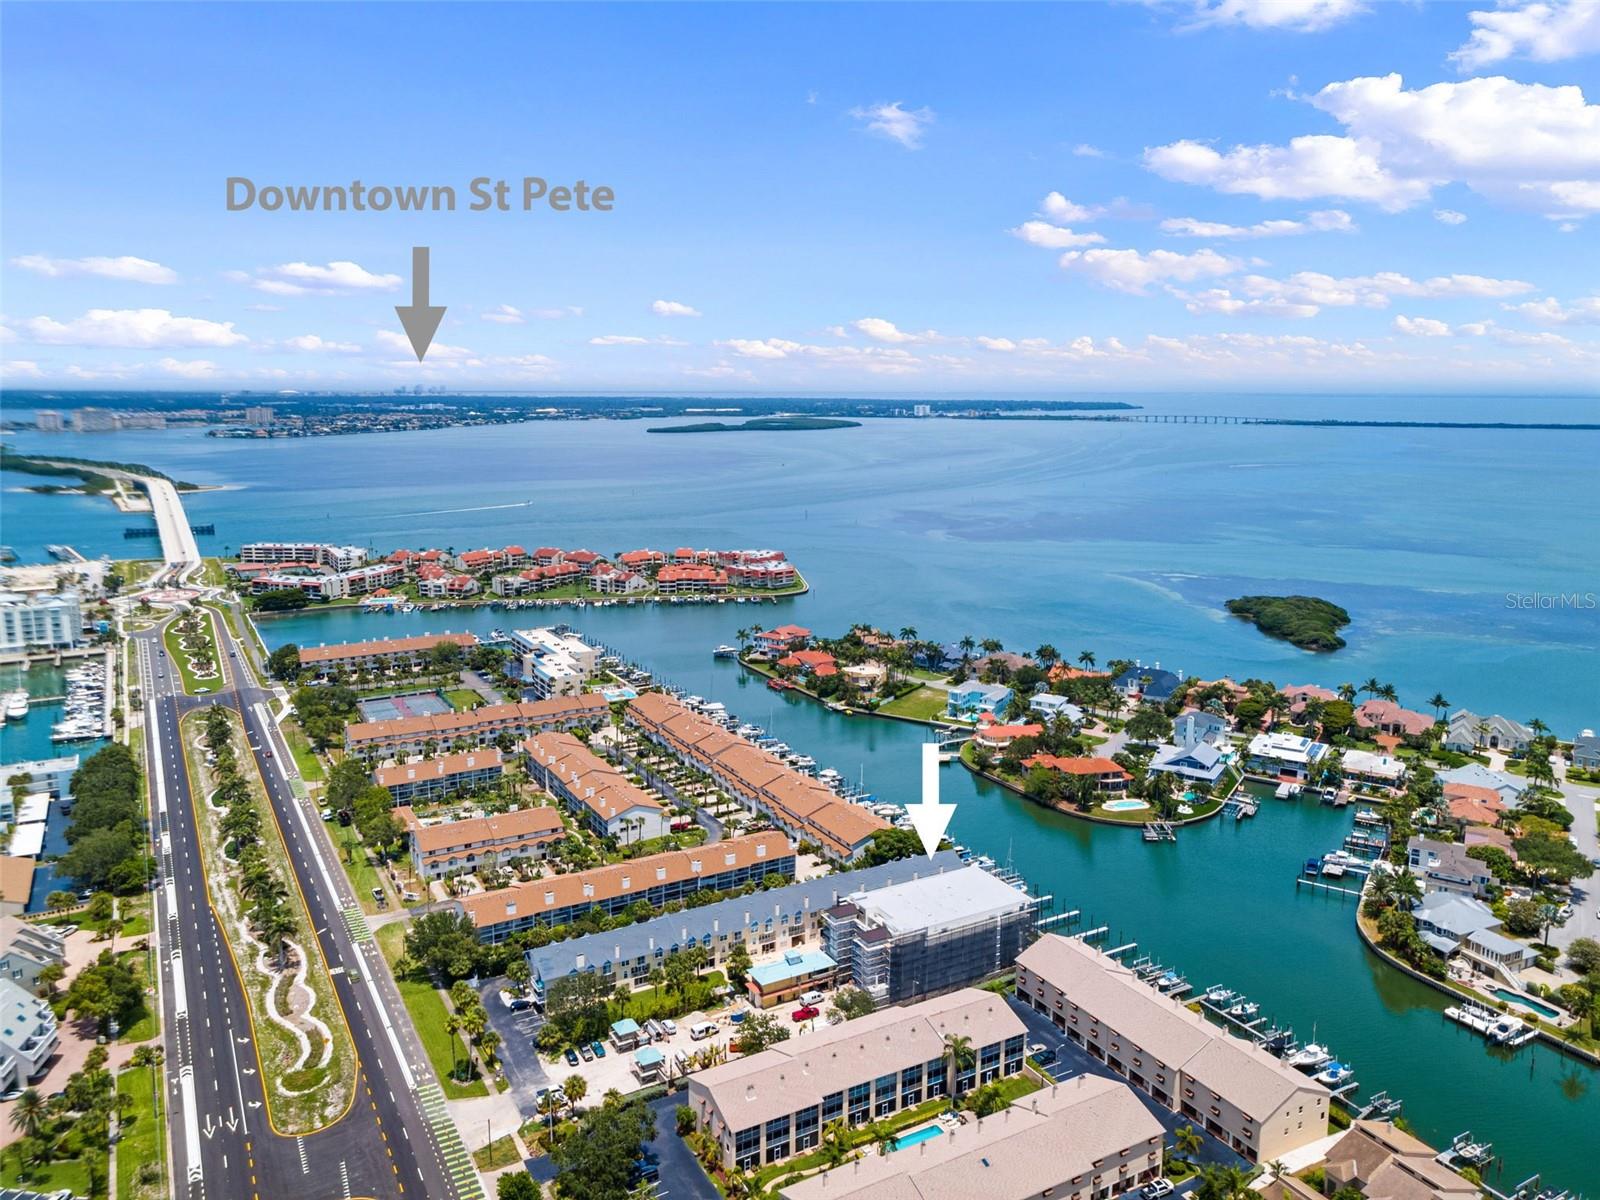 Quiet Cove is only 15 minutes away from downtown St Pete. So enjoy the boating and fishing at Quiet Cove during the day and head downtown for nightlife....